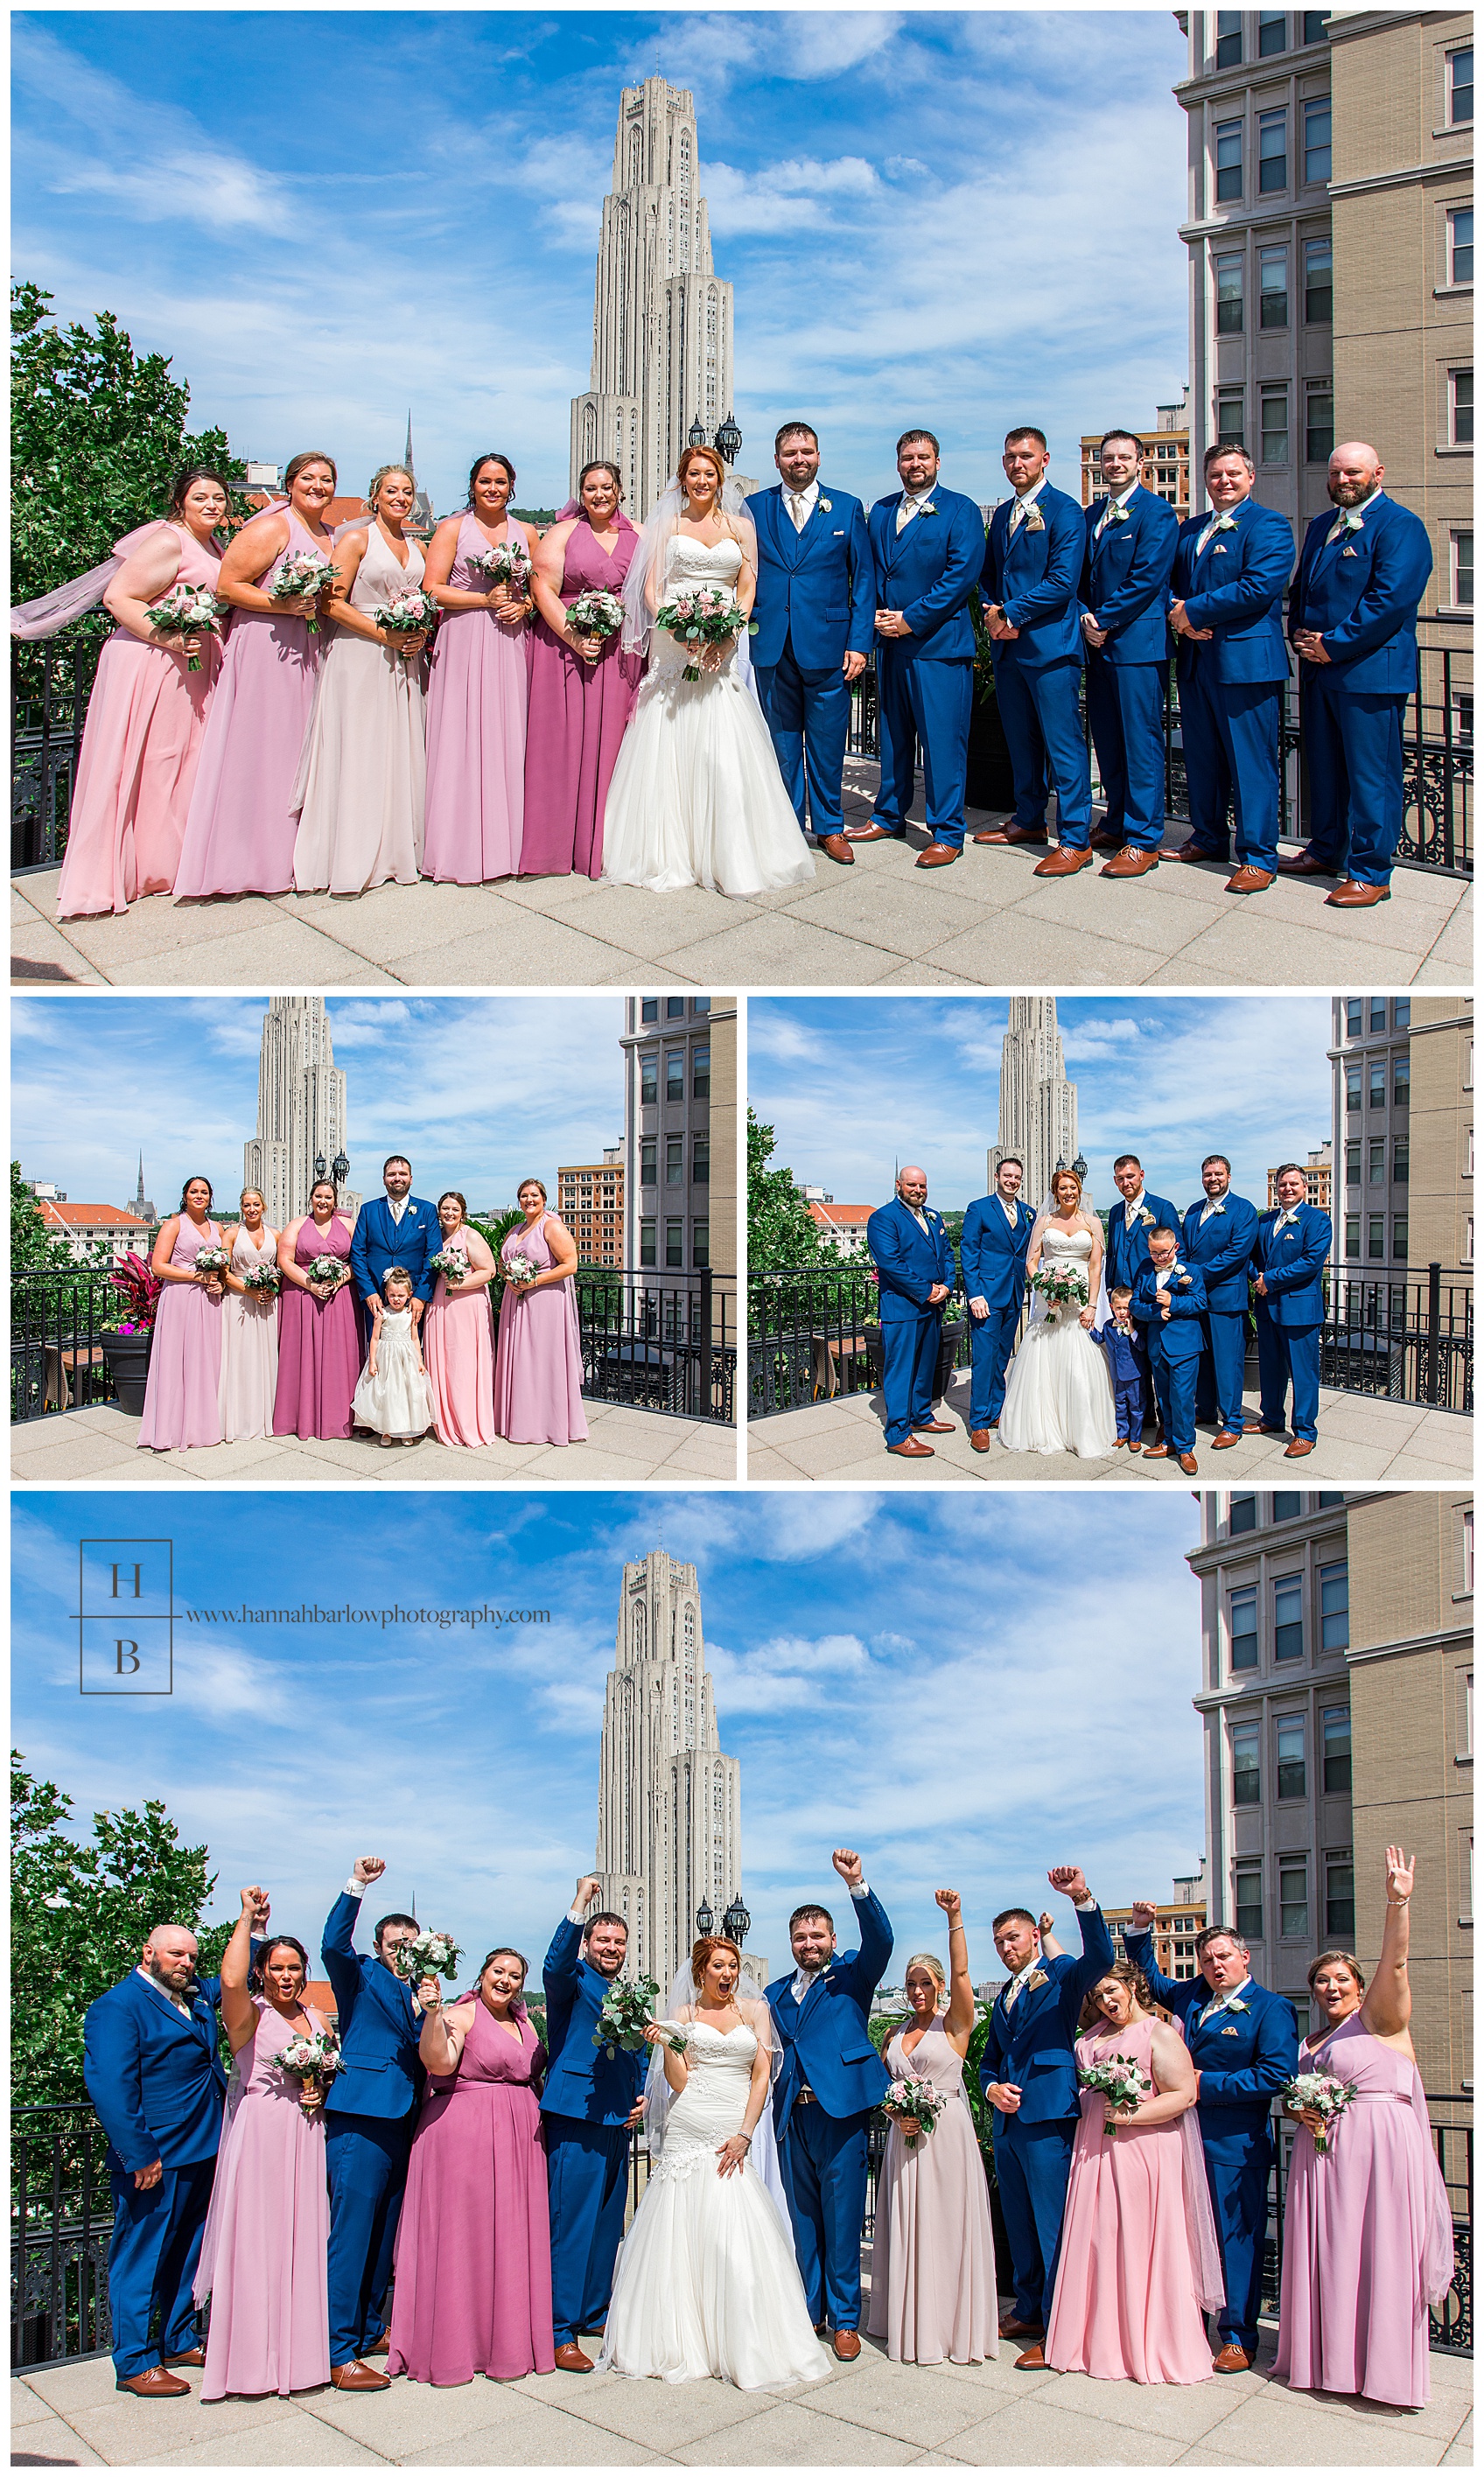 Bridal Party Photos on the Terrace of the University Club in Pittsburgh